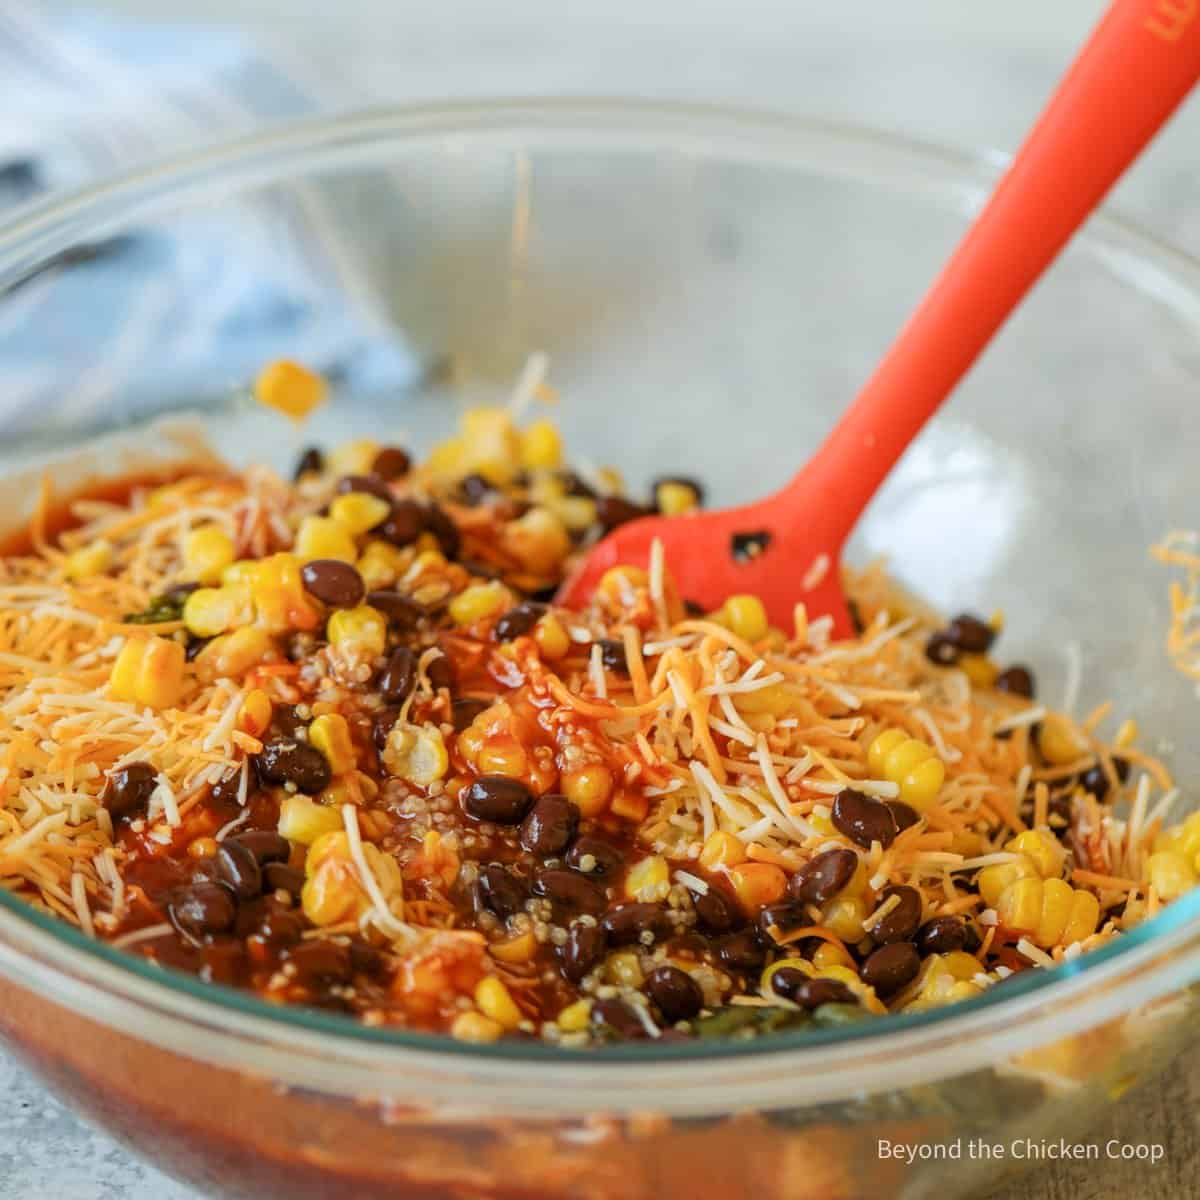 Enchilada filling in a mixing bowl.